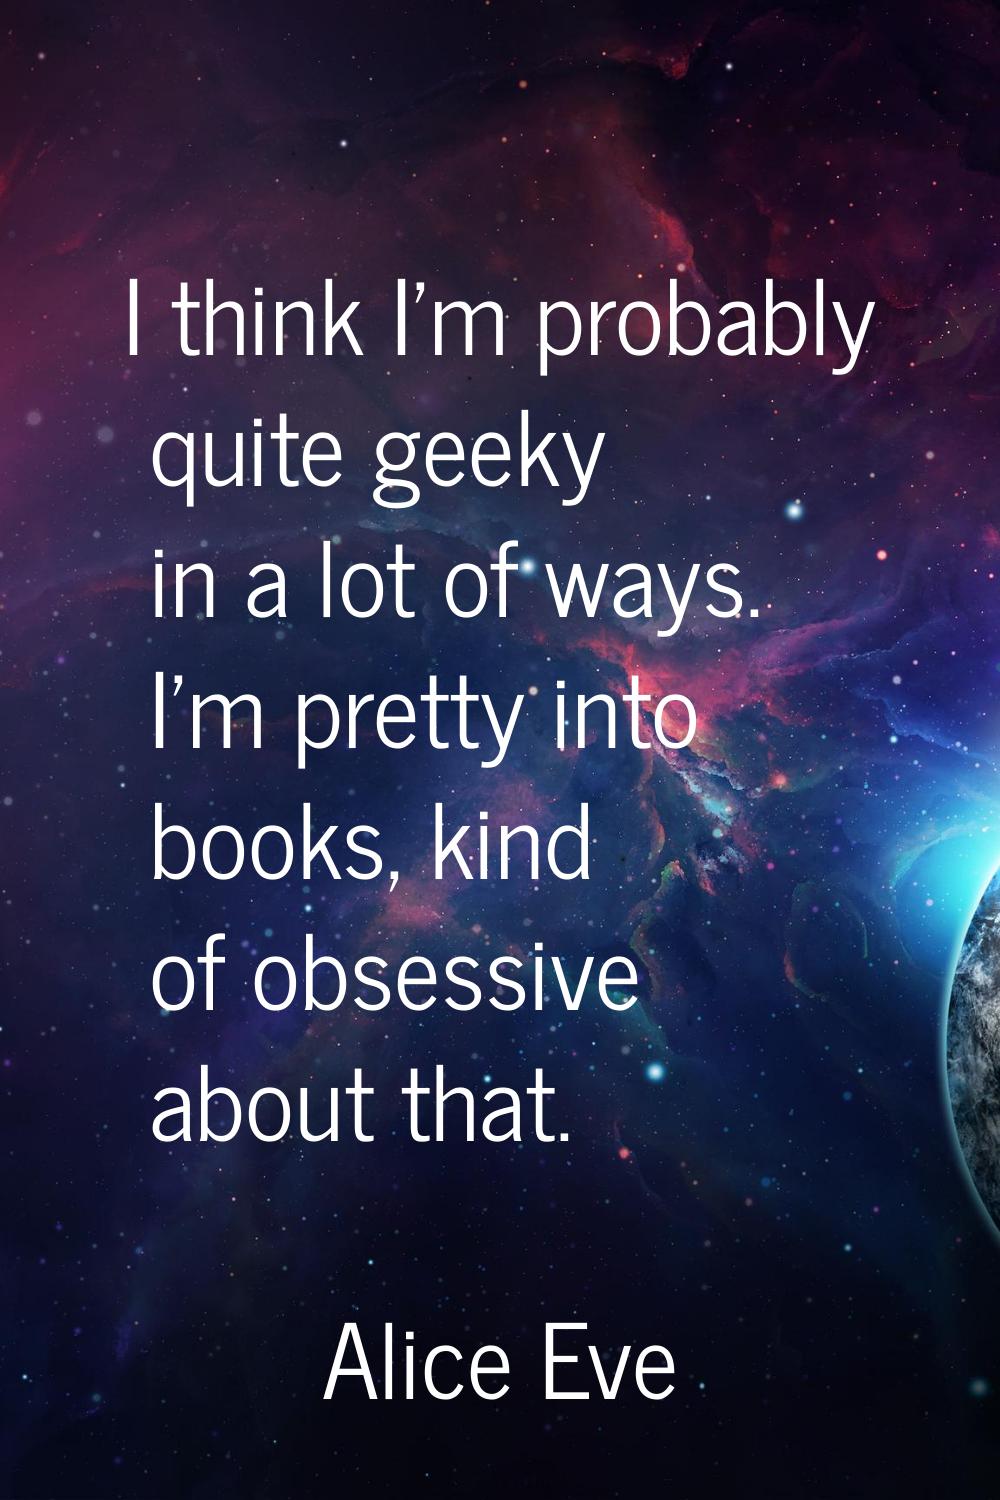 I think I'm probably quite geeky in a lot of ways. I'm pretty into books, kind of obsessive about t